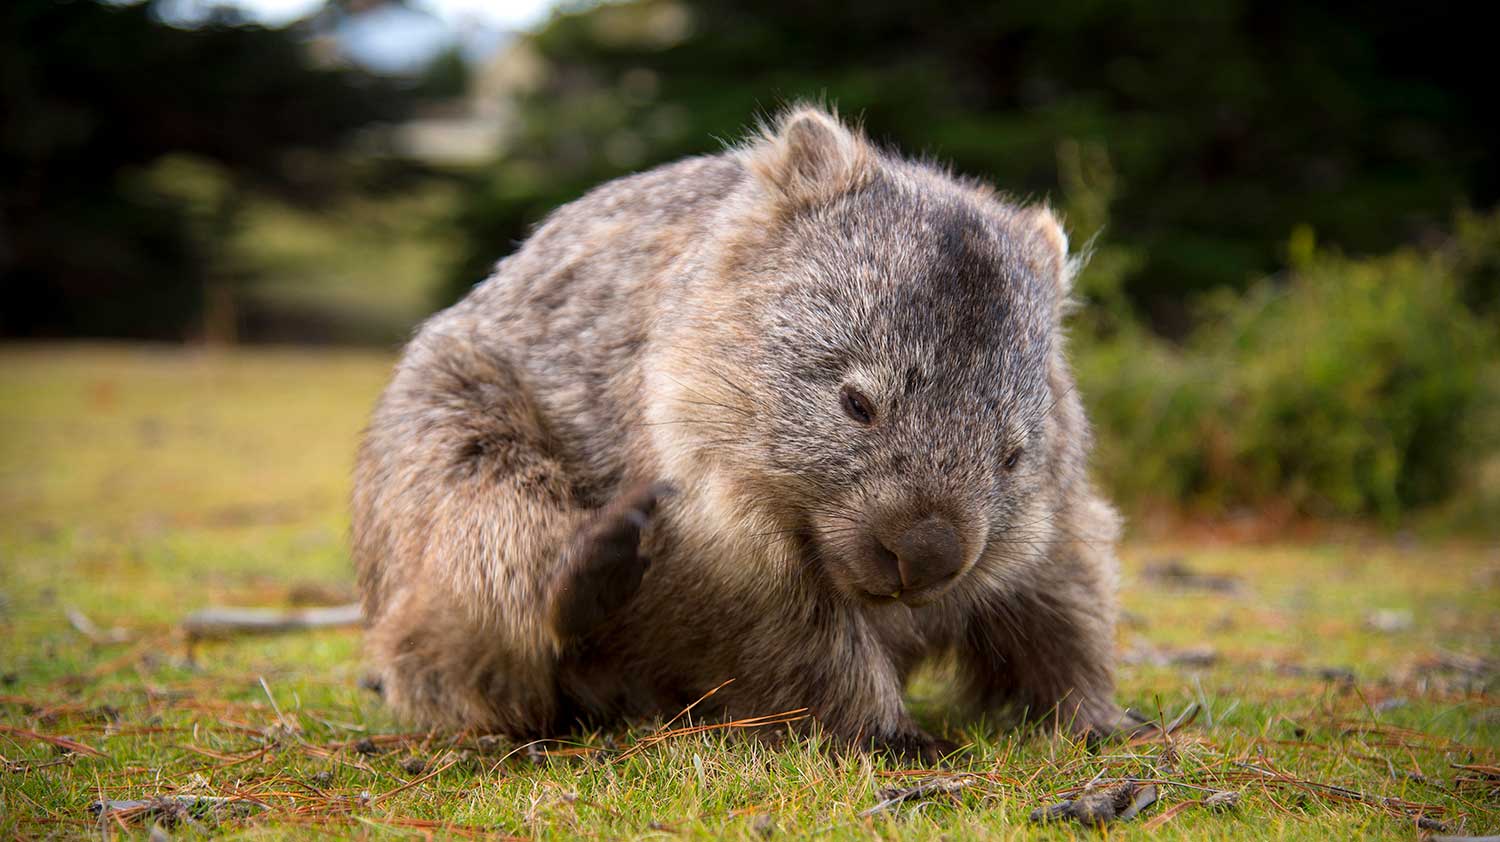 A wombat sits on green grass and has a scratch.